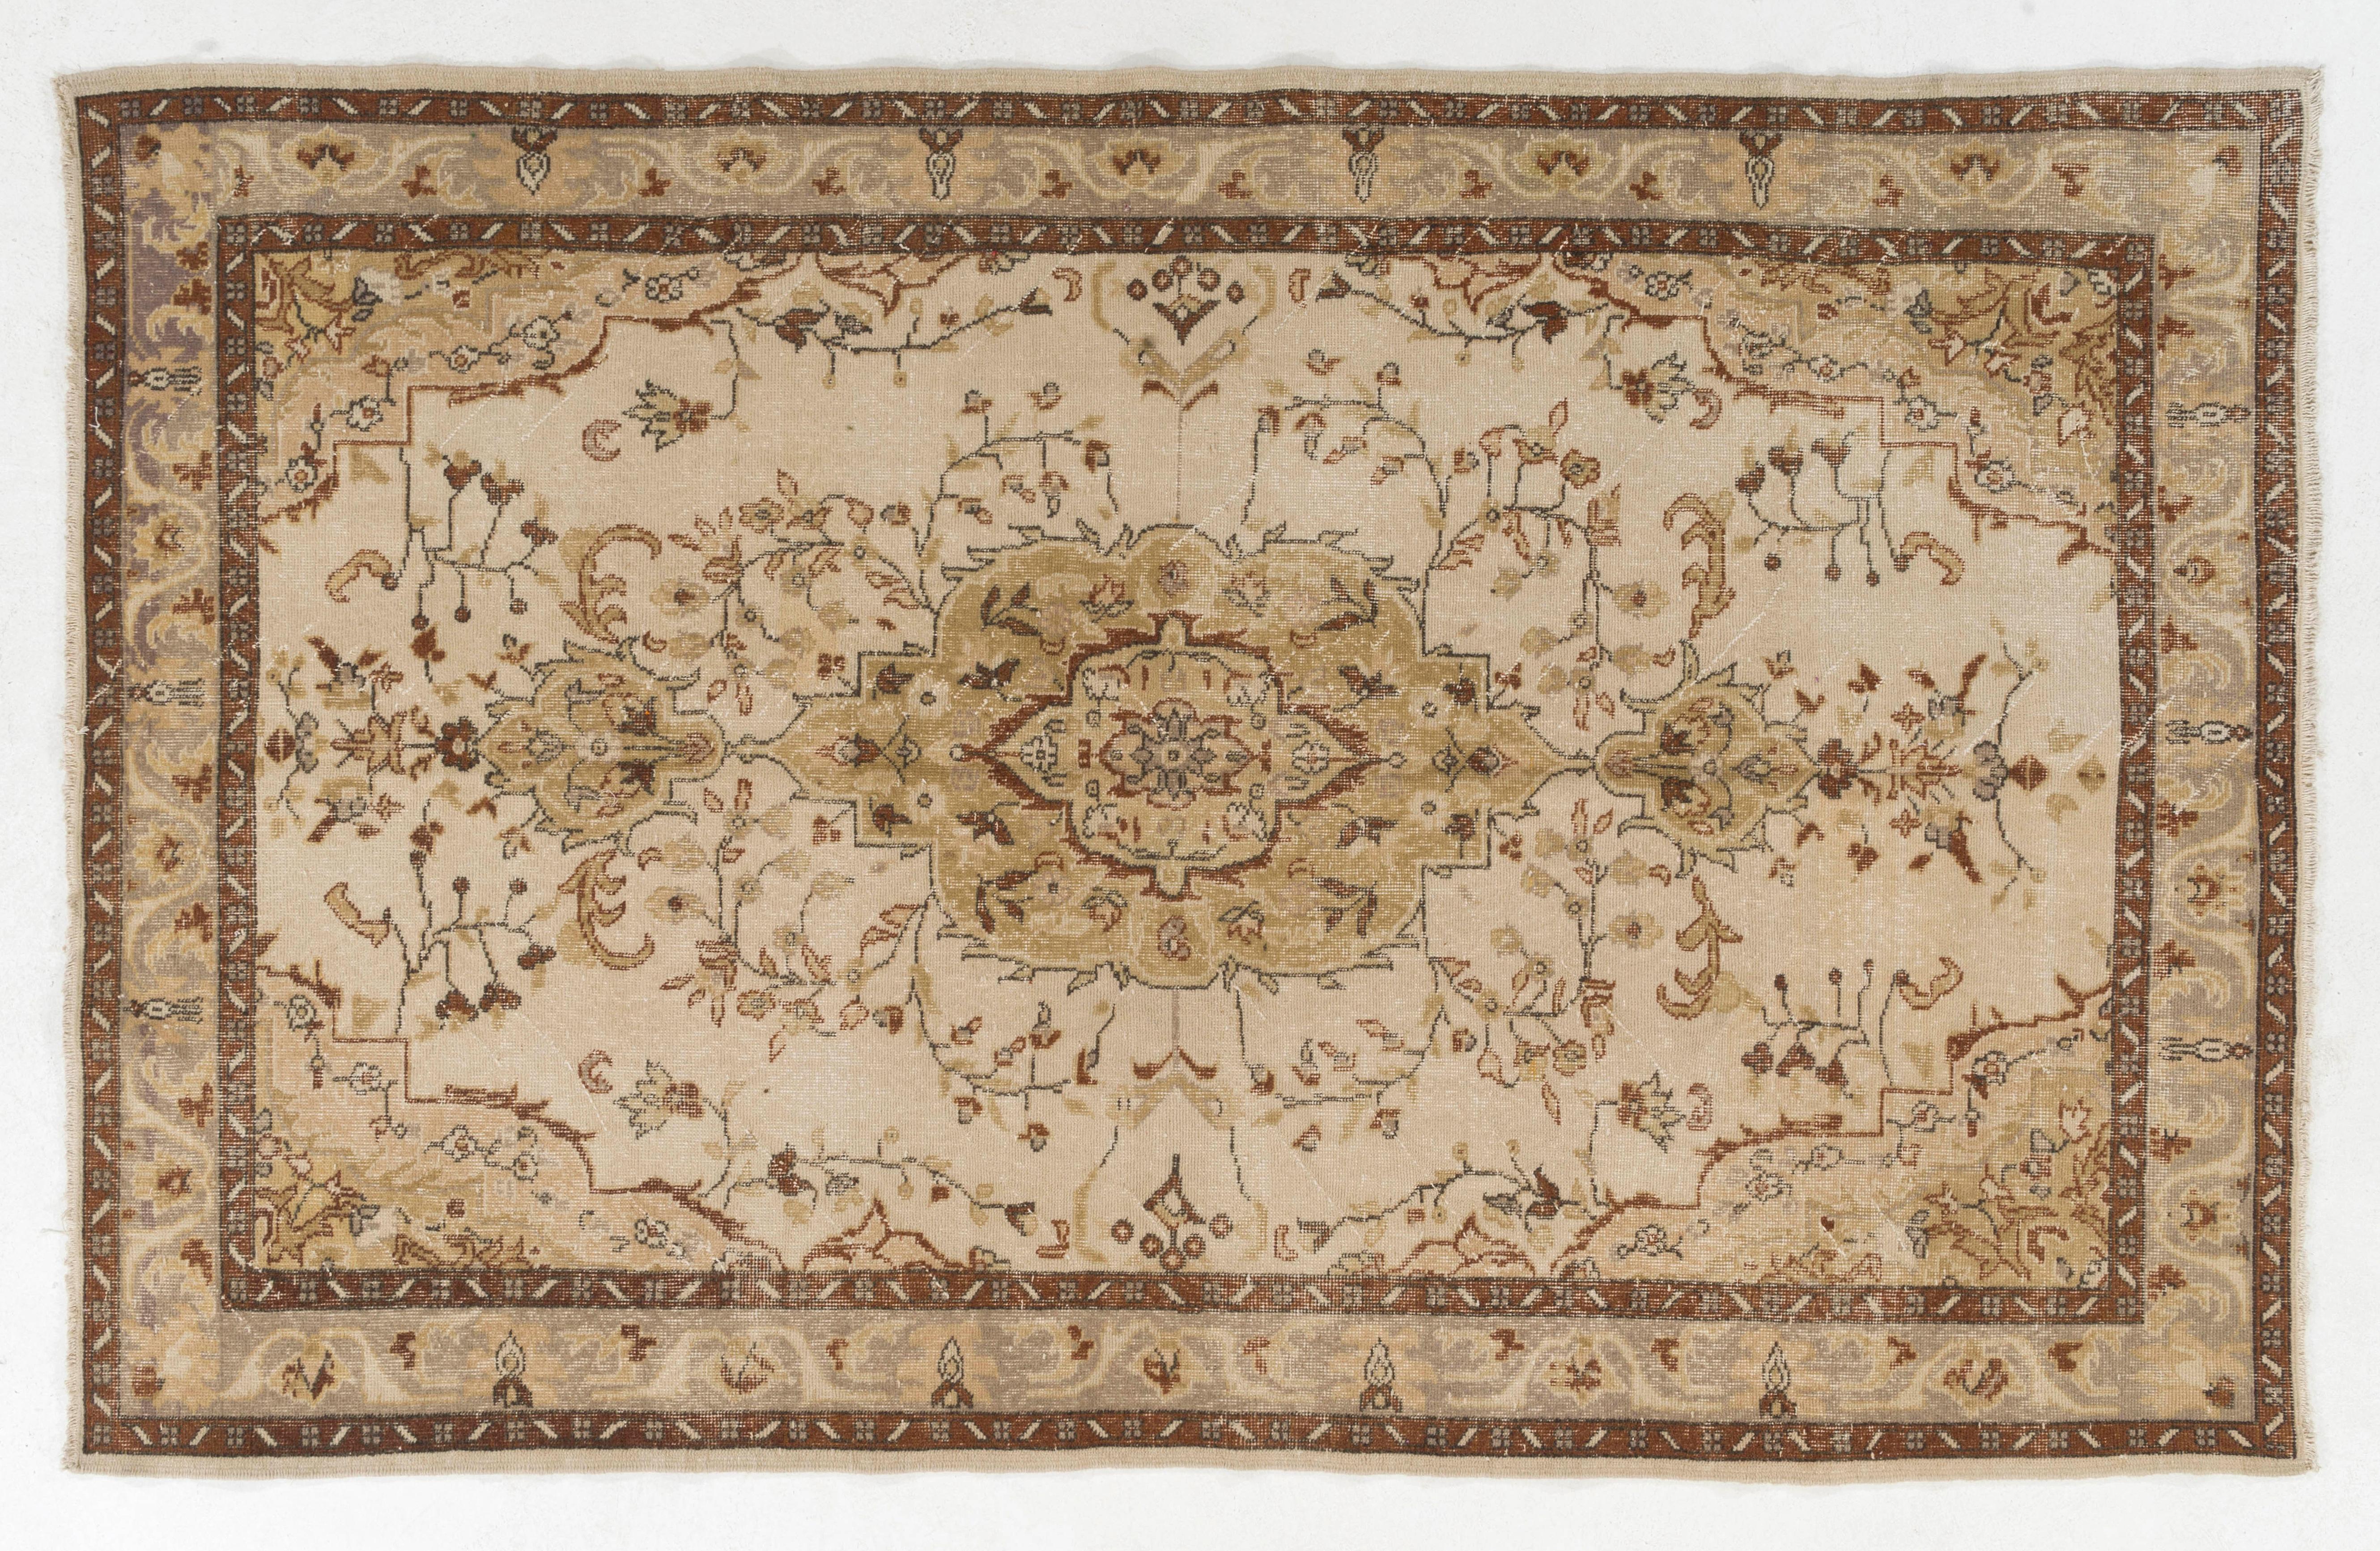 Hand-Woven 6x9.5 Ft Handmade Turkish Vintage Rug with Neutral Color, Woolen Carpet in Beige For Sale